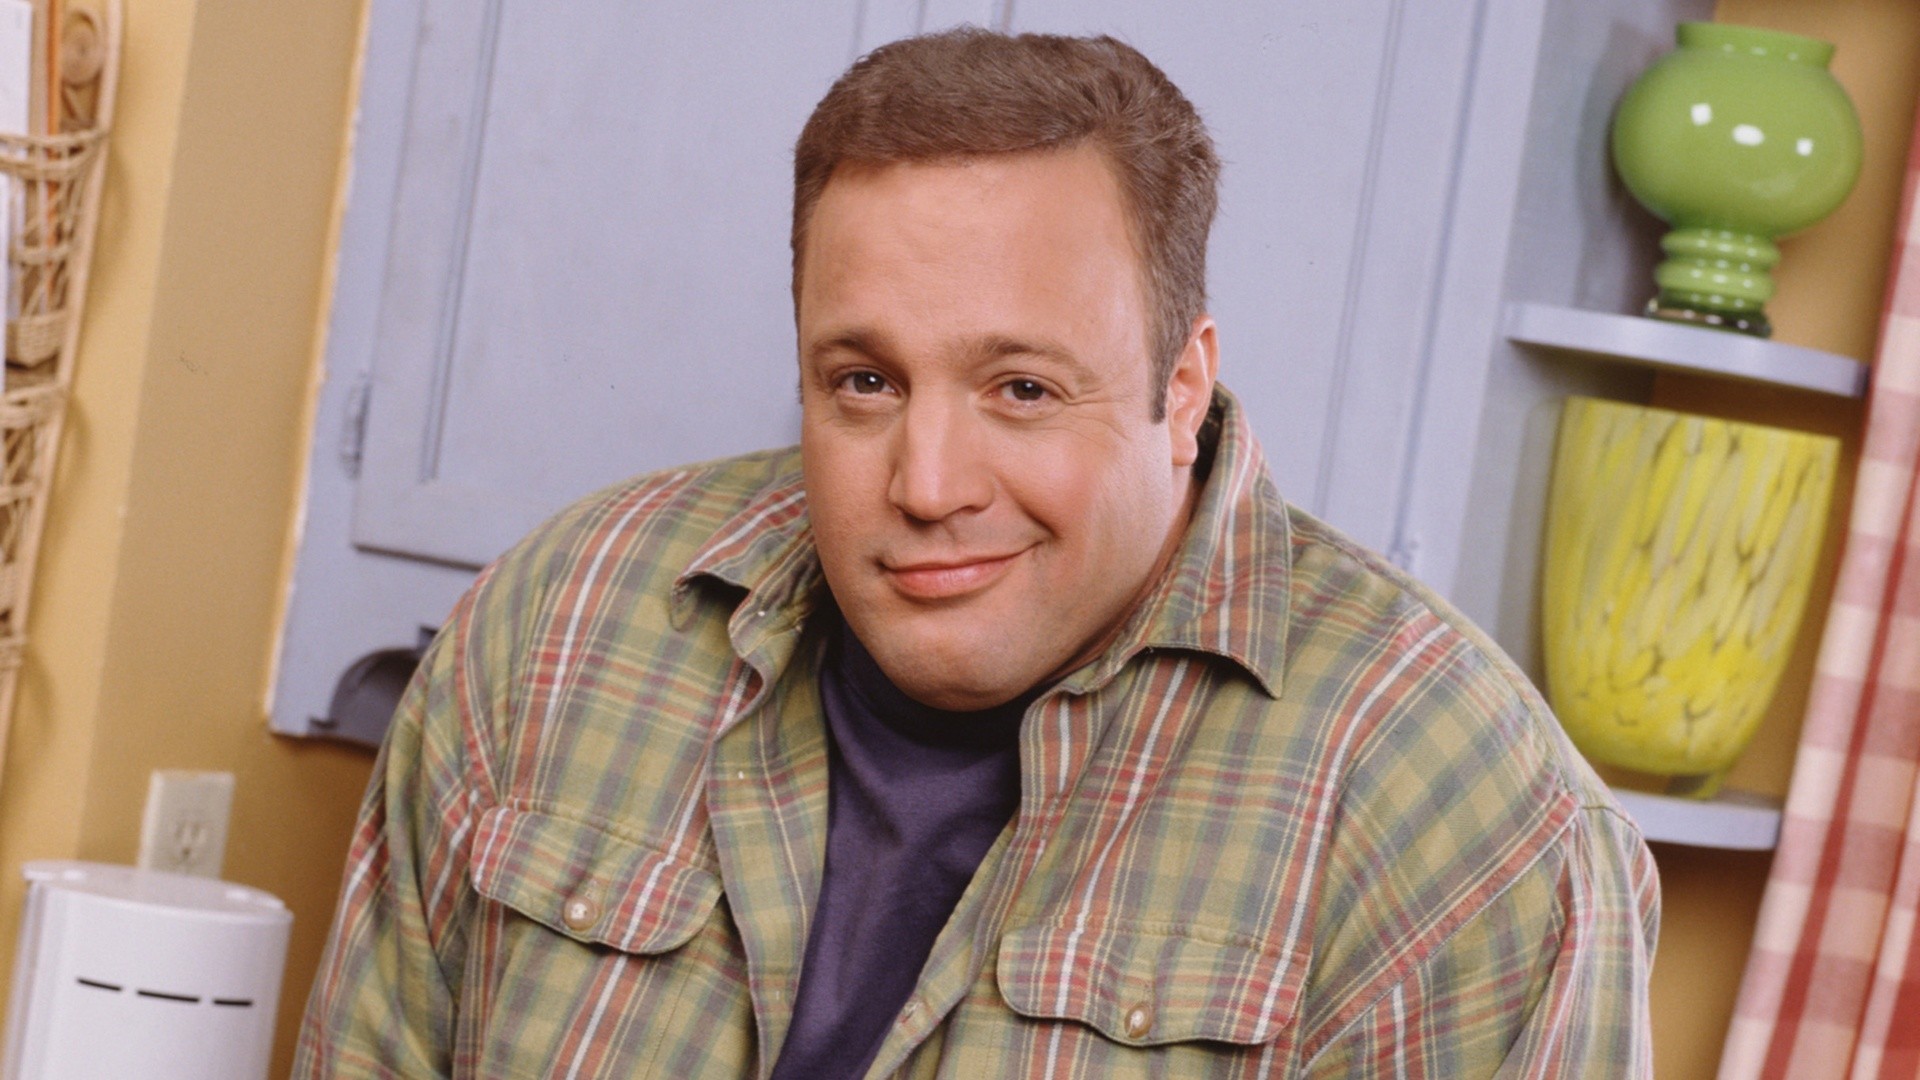 Kevin James joins in on viral 'King of Queens' meme